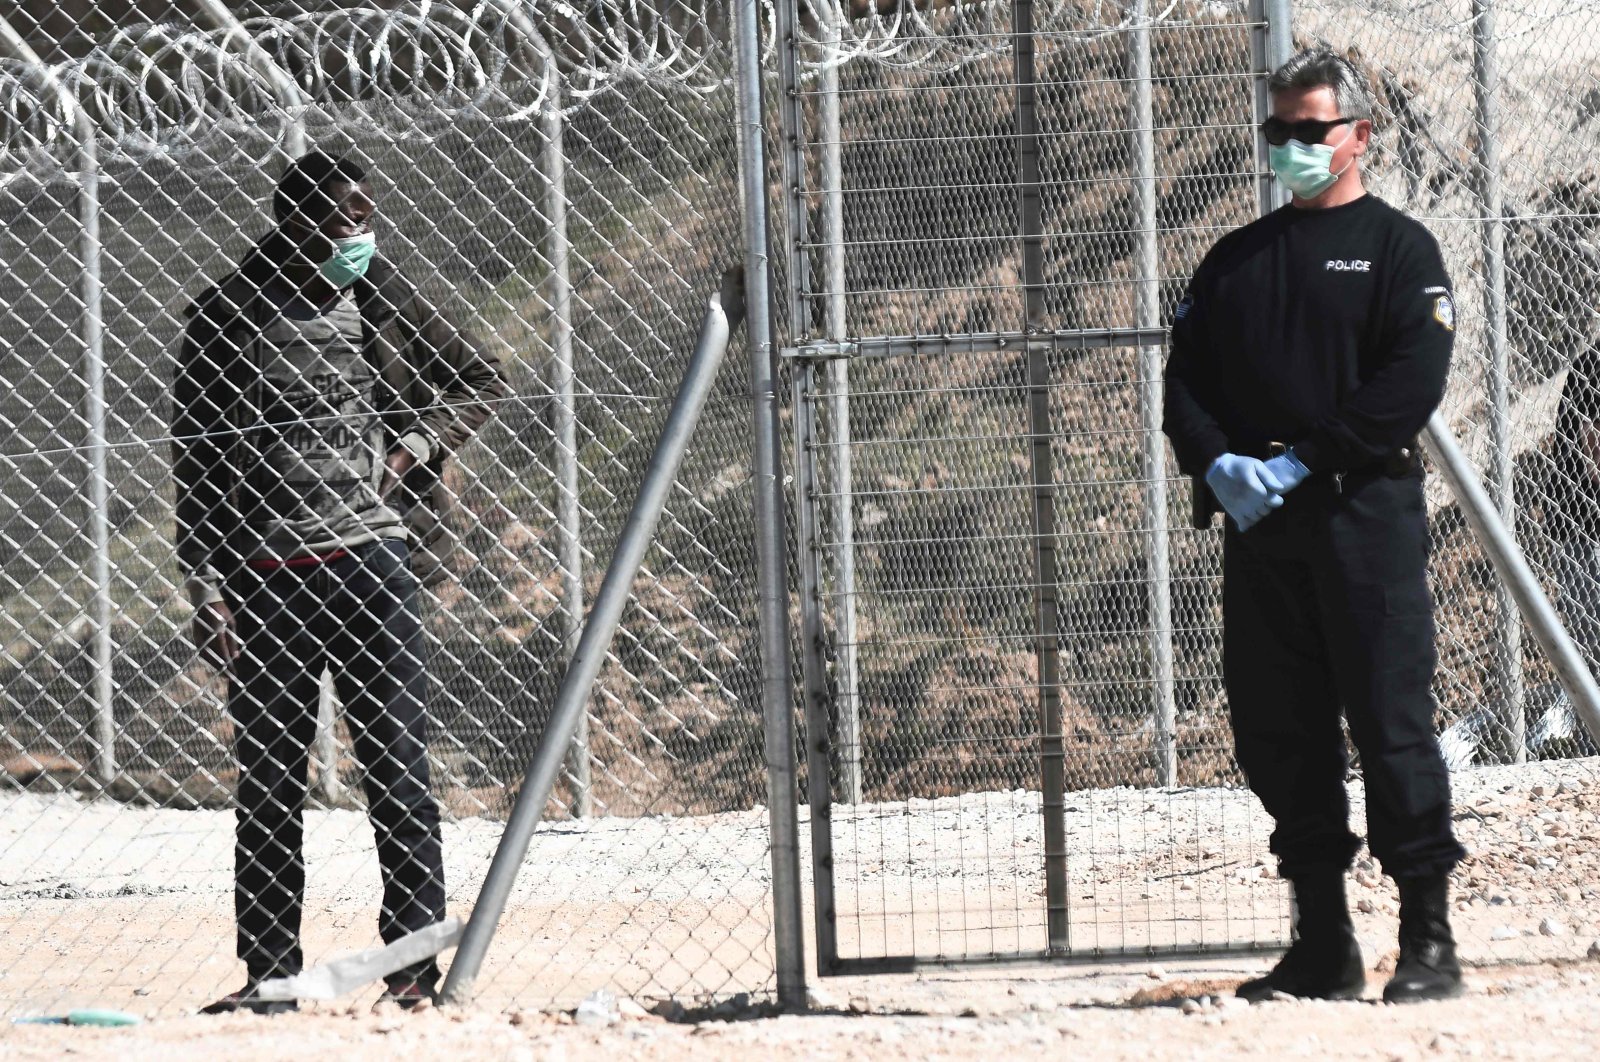 A migrant looks at a Greek police officer at a closed camp at Kleidi near Promahonas, northern Greece, March 21, 2020. (AFP Photo)